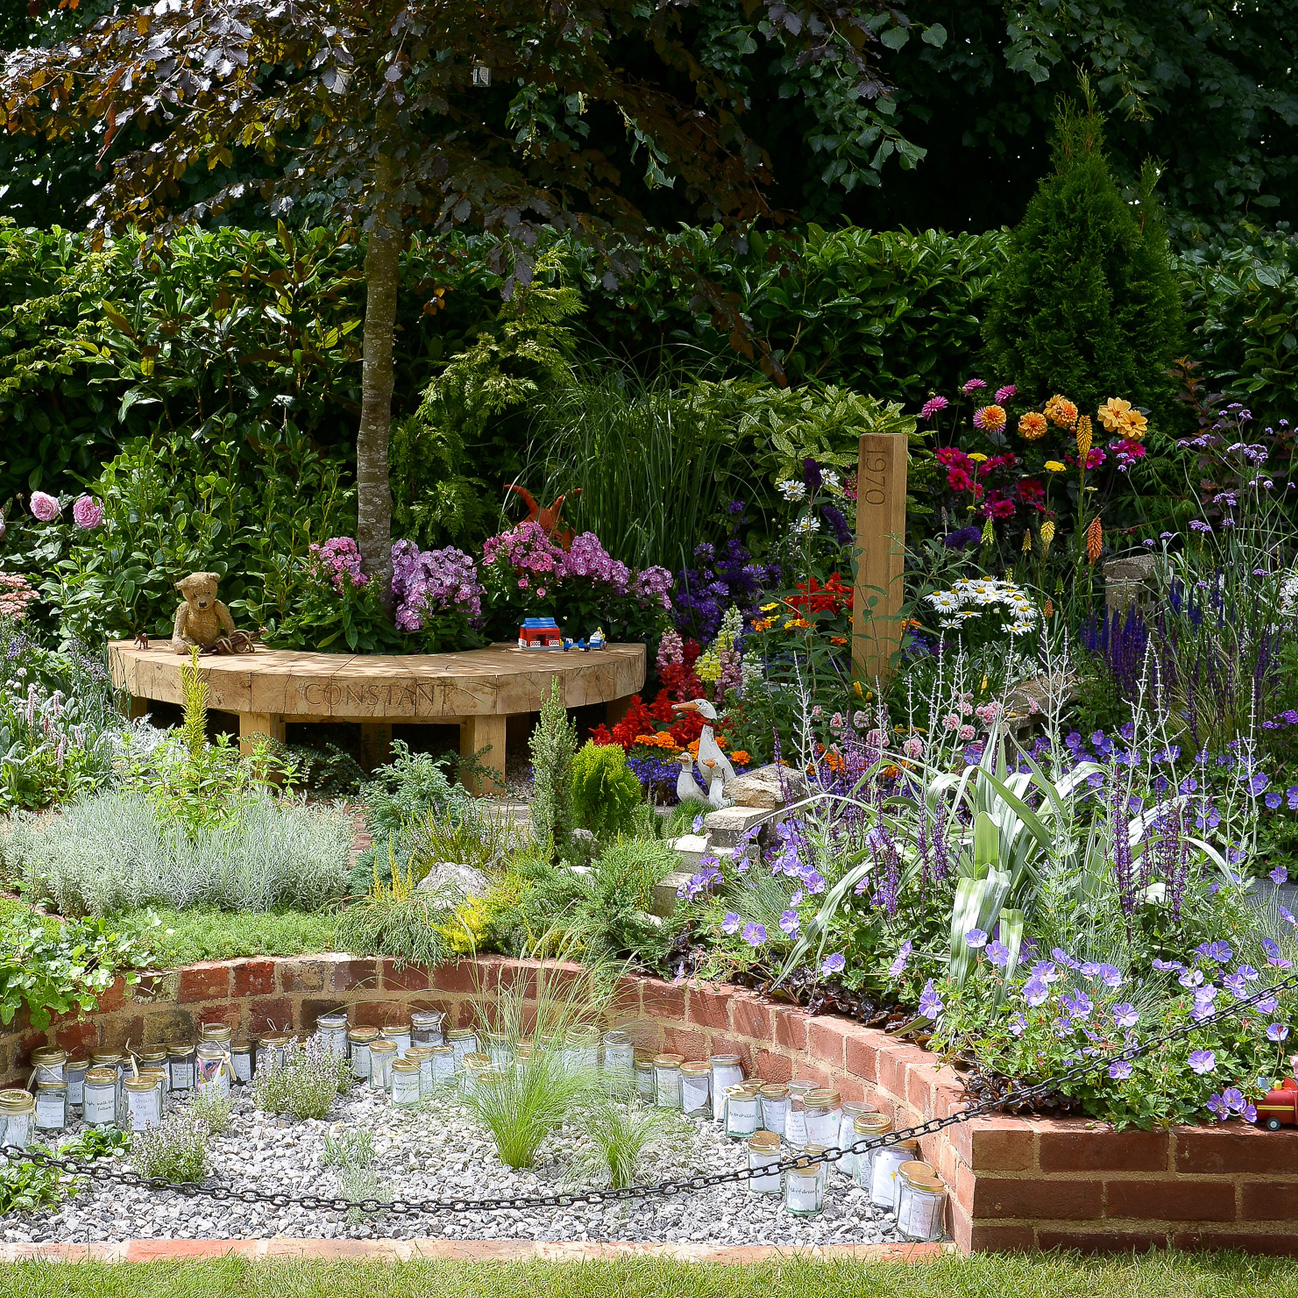 NSPCC's lessons from hosting legacy gardens at RHS events